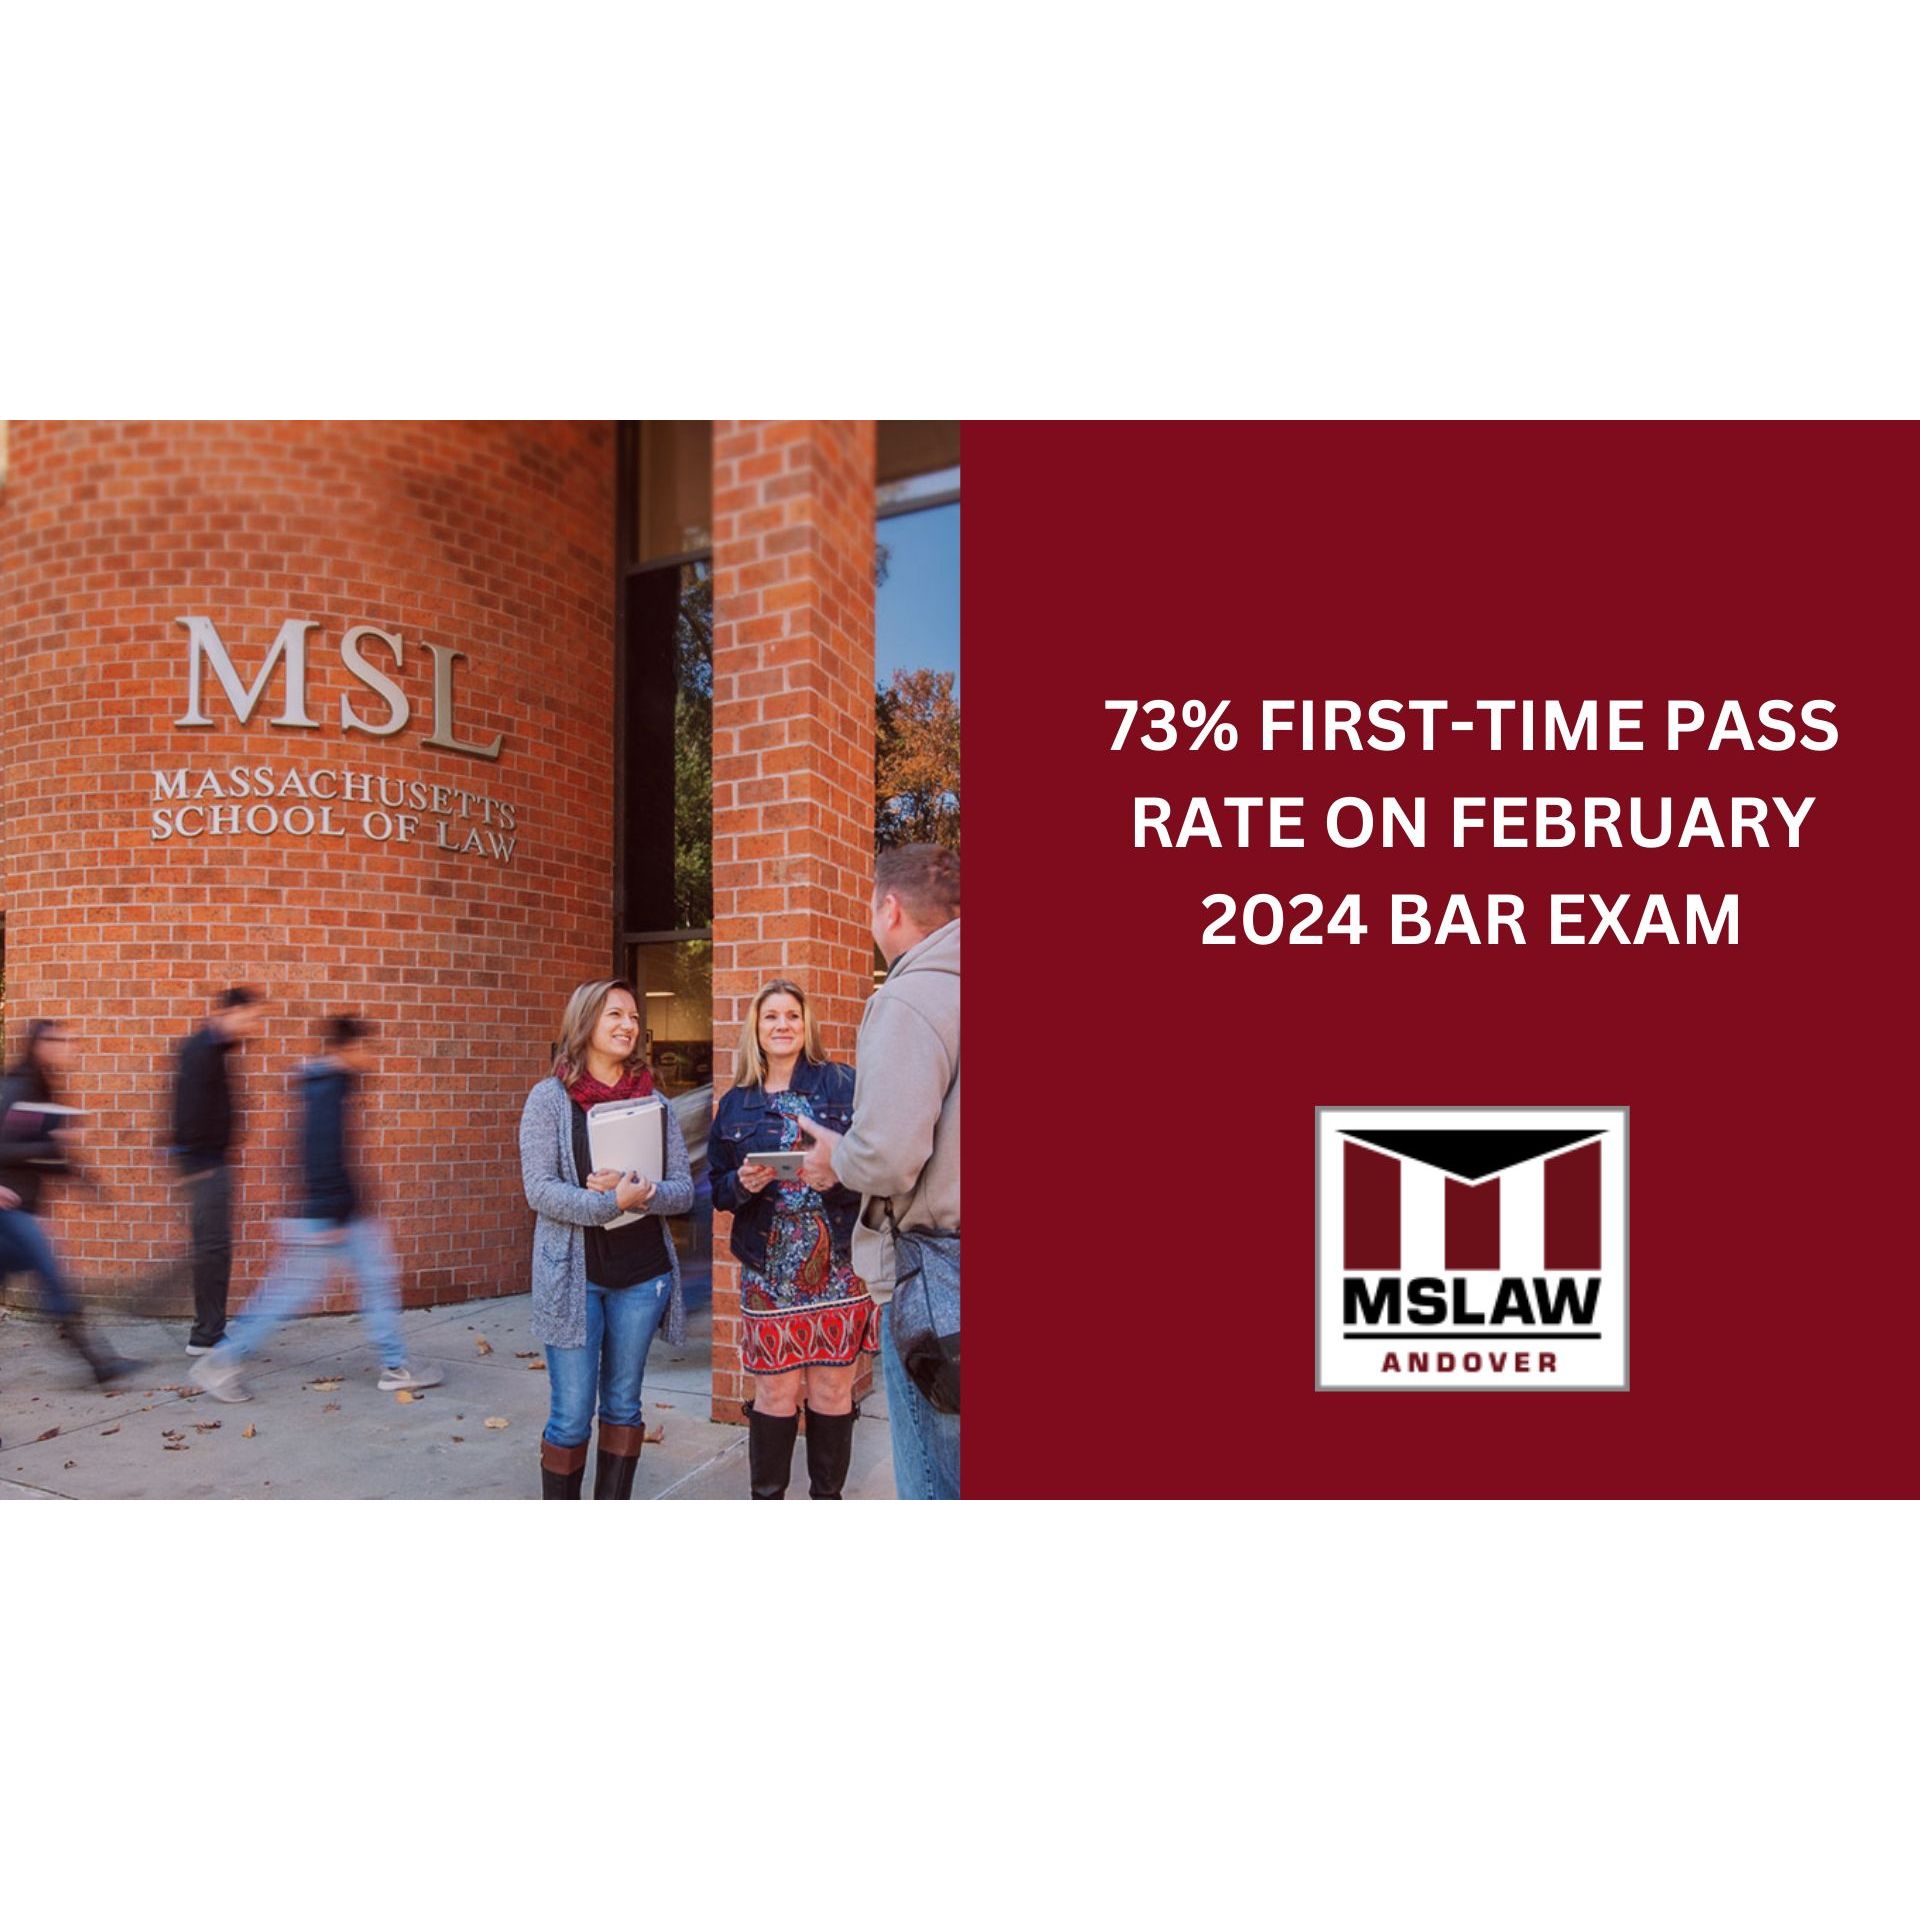 Massachusetts School of Law Surpasses State Average with 73% First-Time Bar Exam Pass Rate - Law Firm Newswire